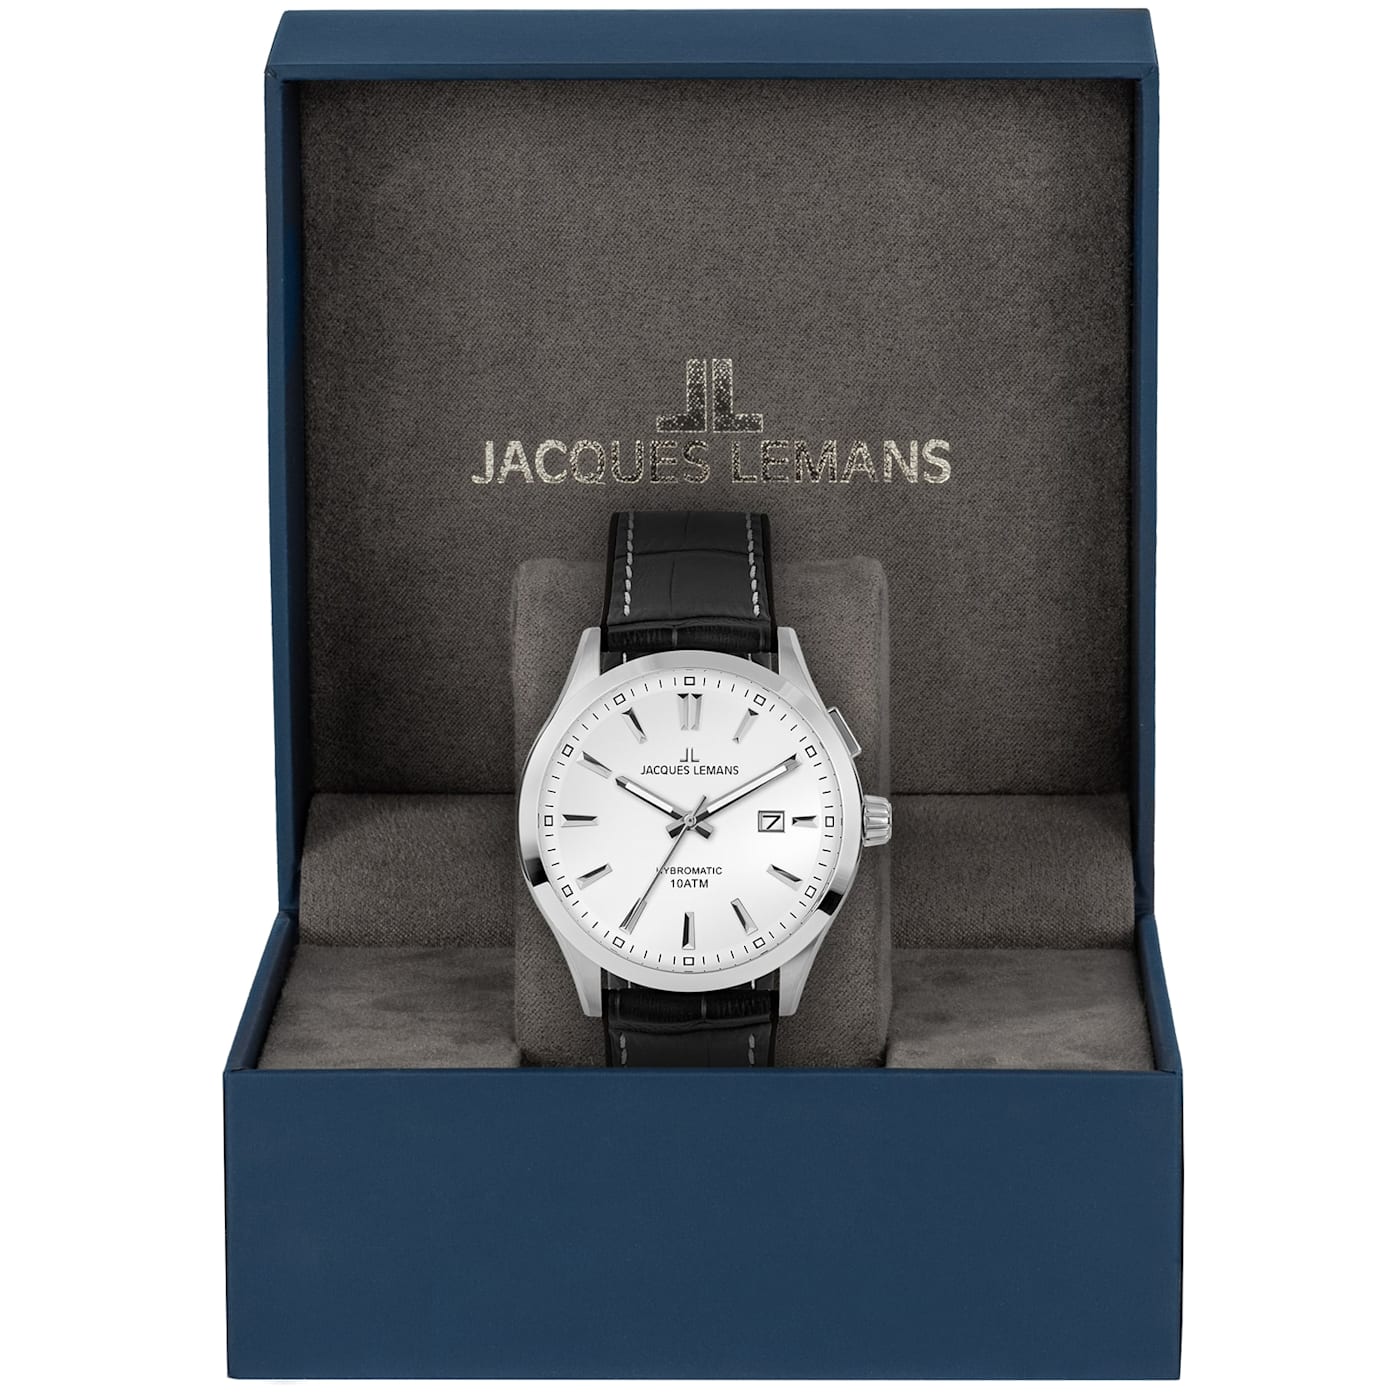 JACQUES LEMANS Hybromatic Men's Watch with Silicone/Leather Strap and Solid  Stainless Steel 1-2130 - 1BT2HA